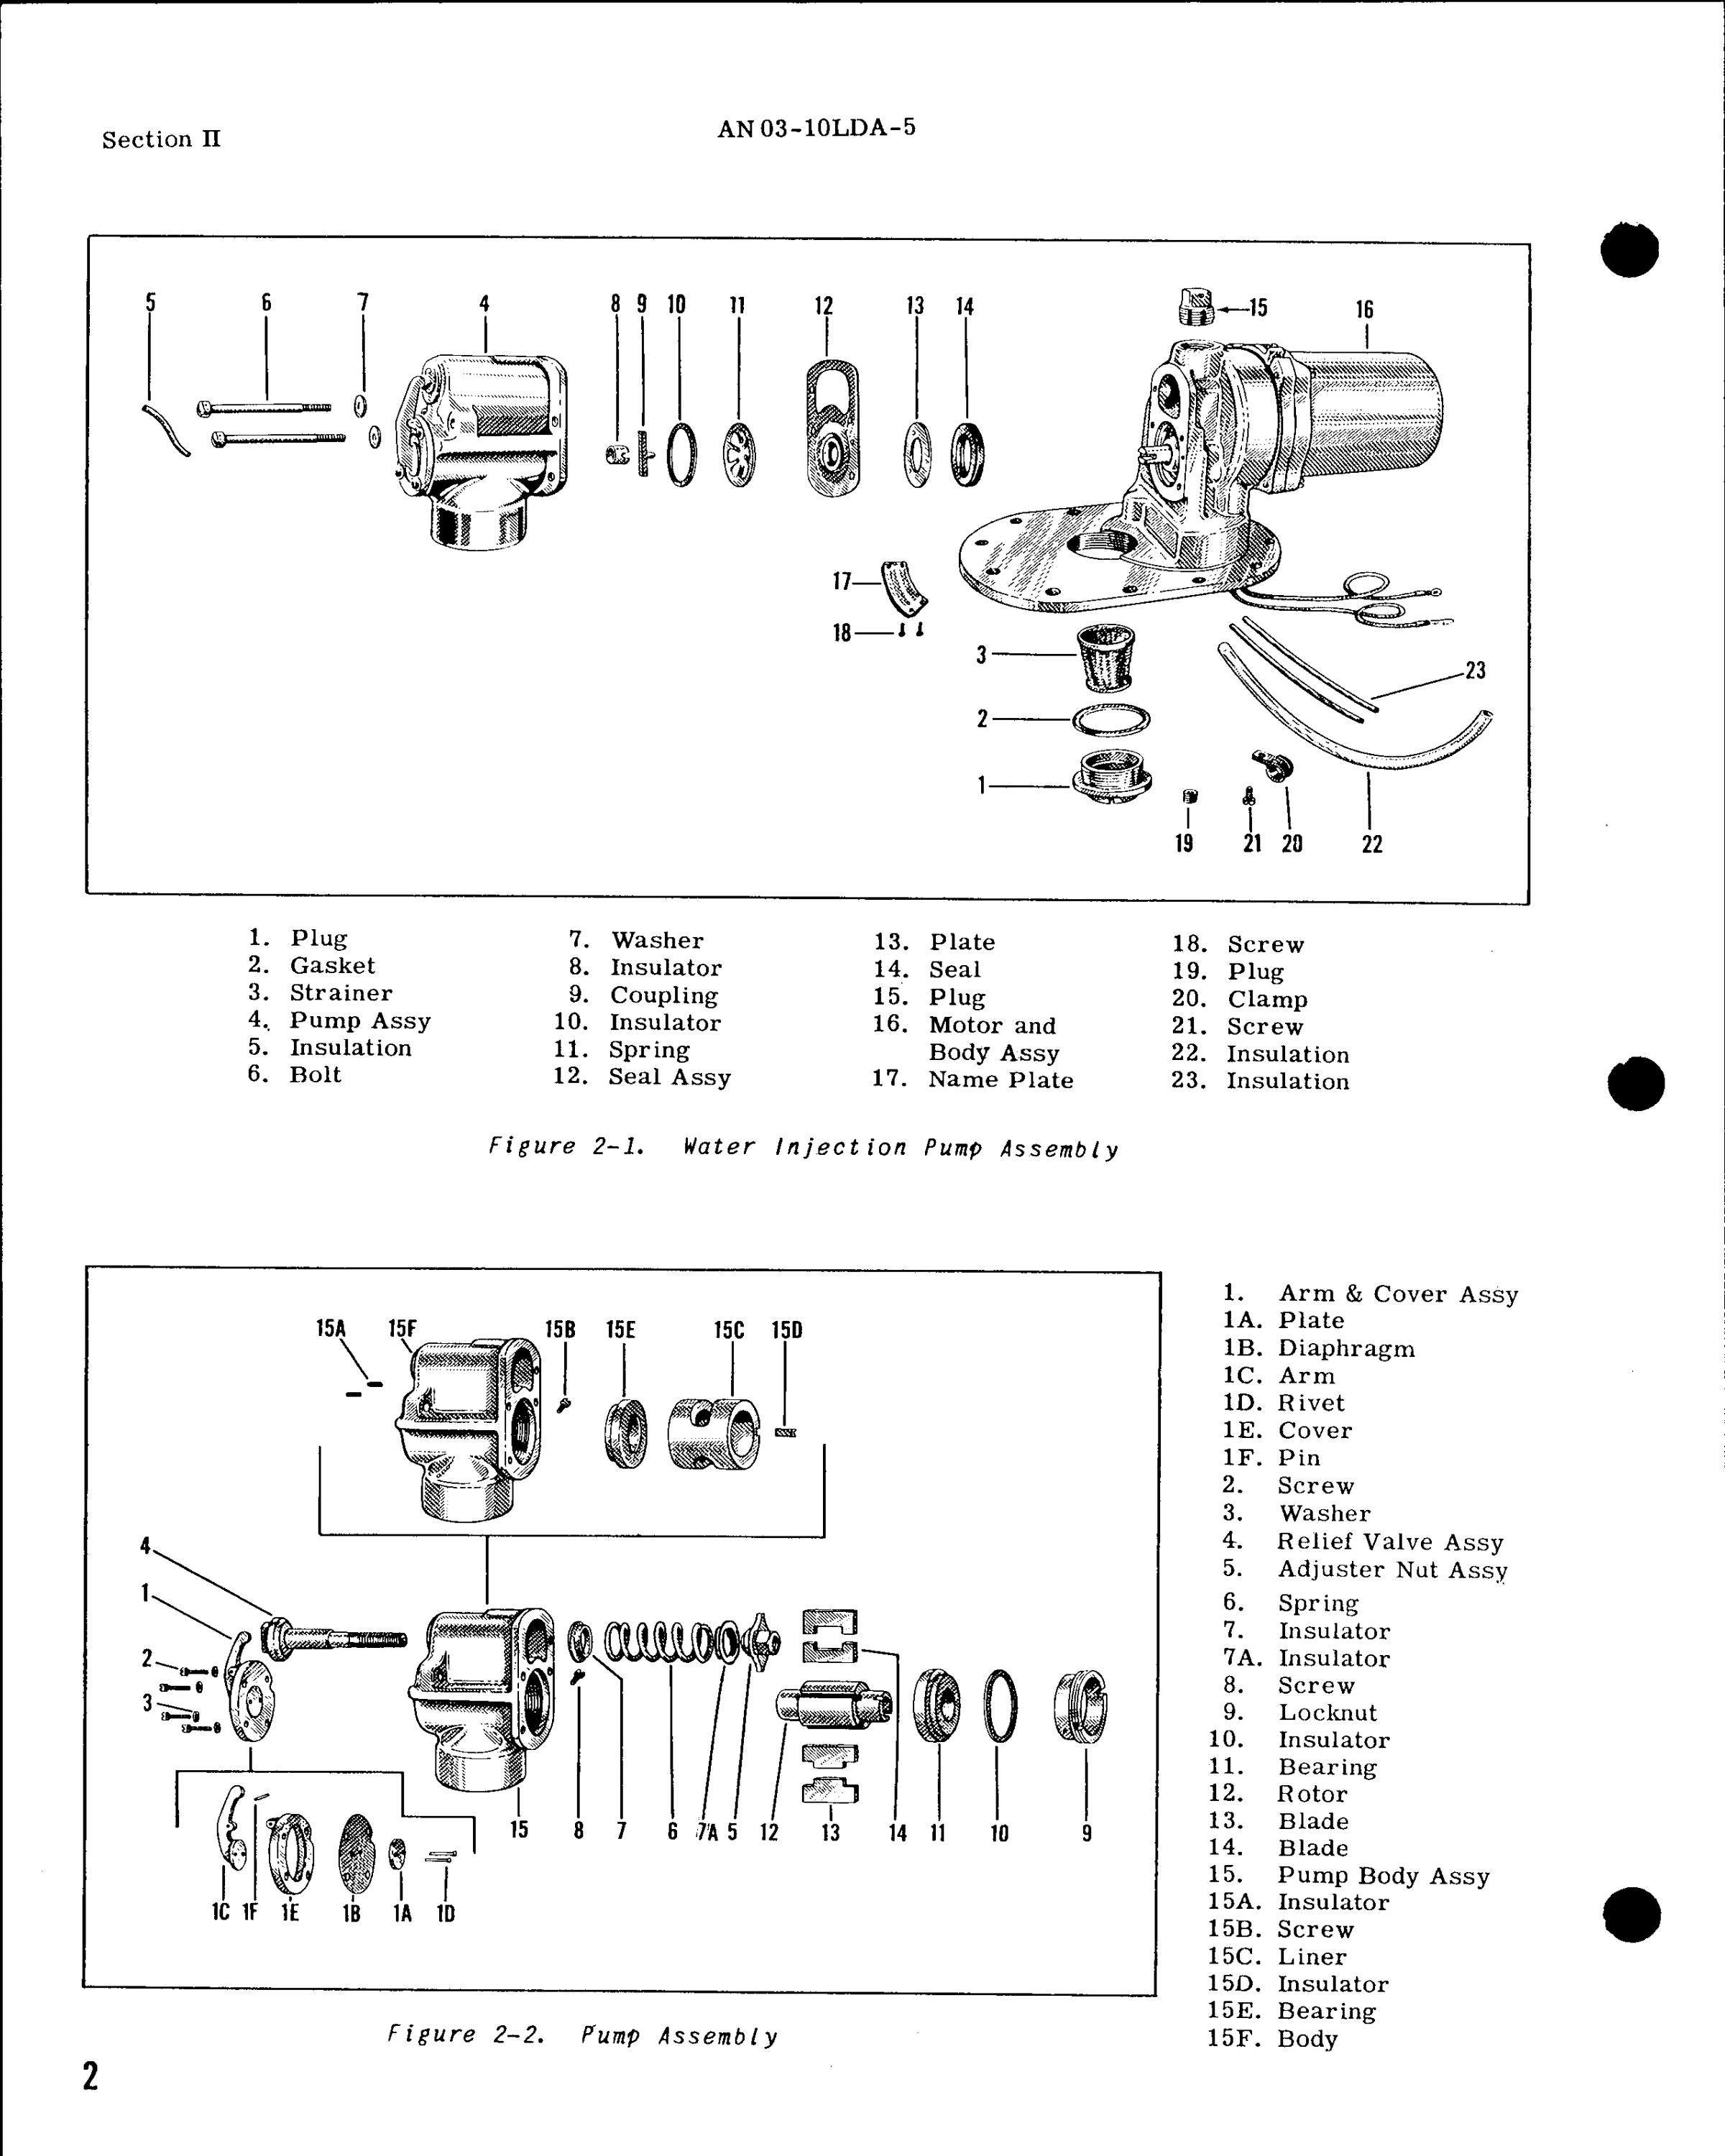 Sample page 8 from AirCorps Library document: Overhaul Instructions for Water Injection Pumps Series RD-8500 (Lear-Romec)